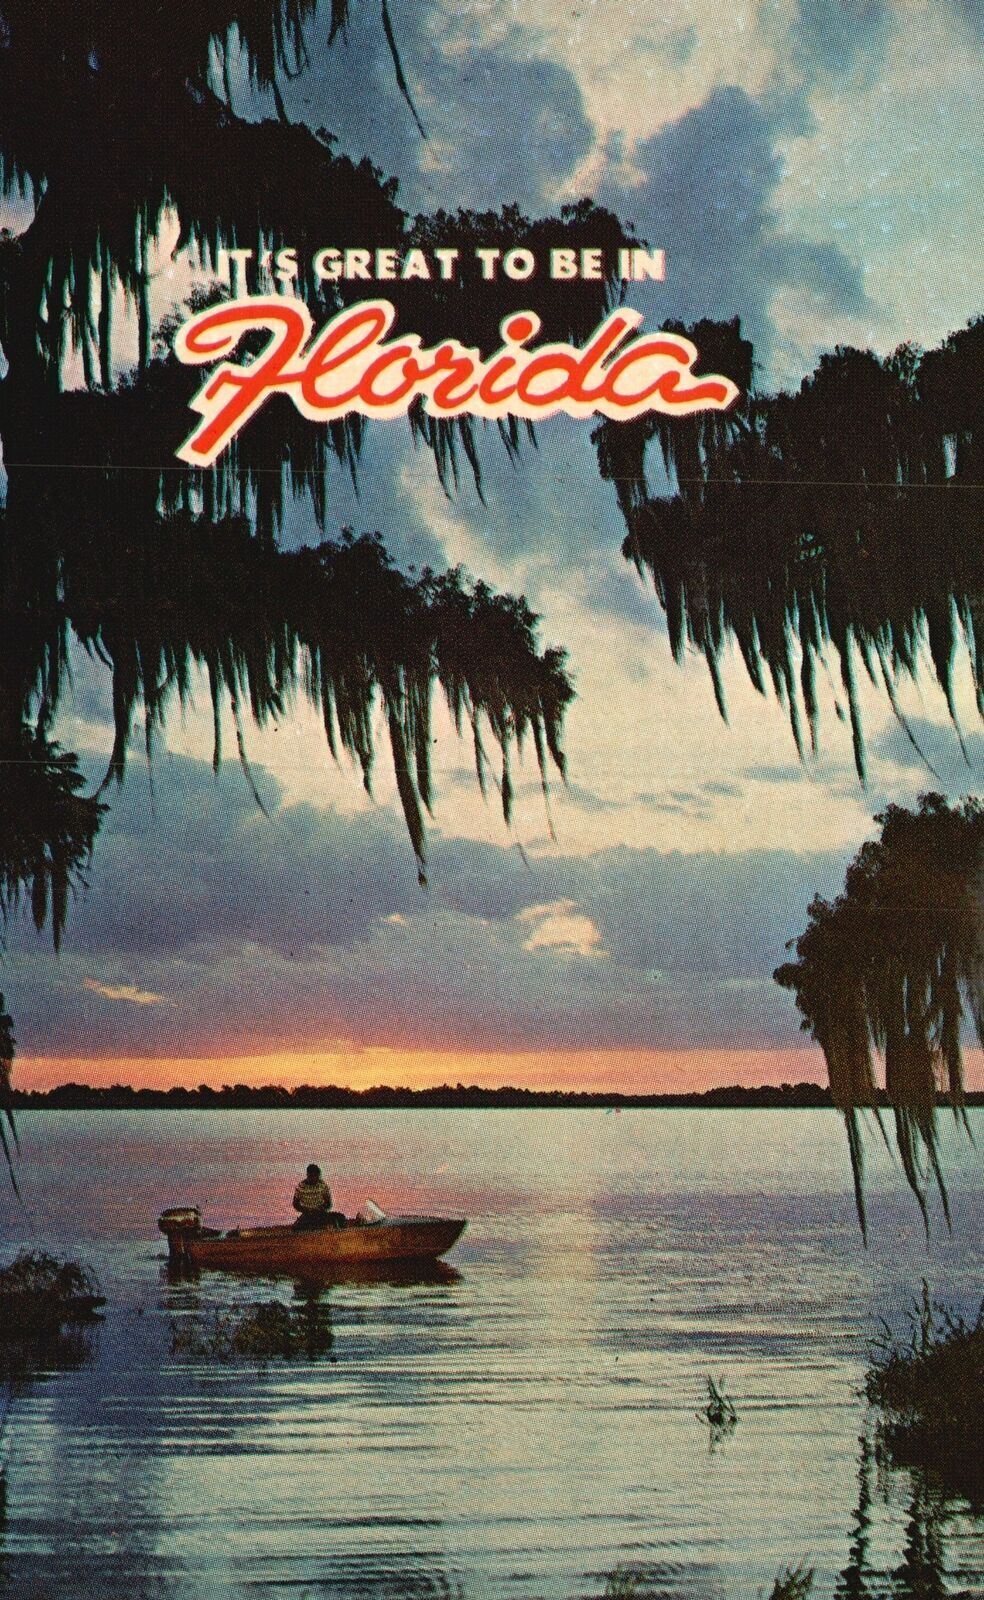 Vintage Postcard Great To Be In Florida Cloudy Sunset While Boating on the River